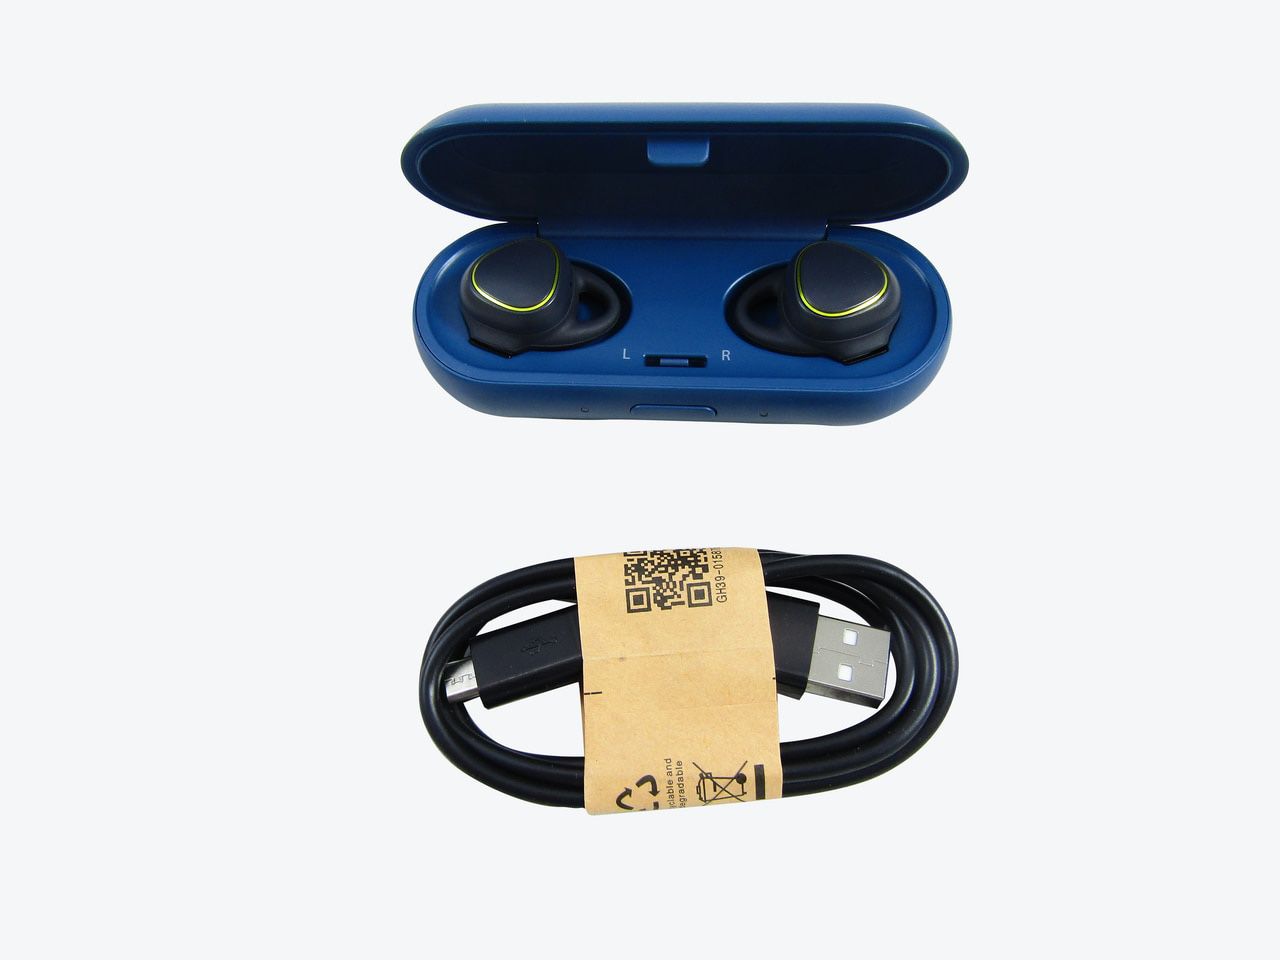 Samsung Galaxy Buds , Bluetooth True Wireless Earbuds (Wireless Charging Case Included), Blue VG